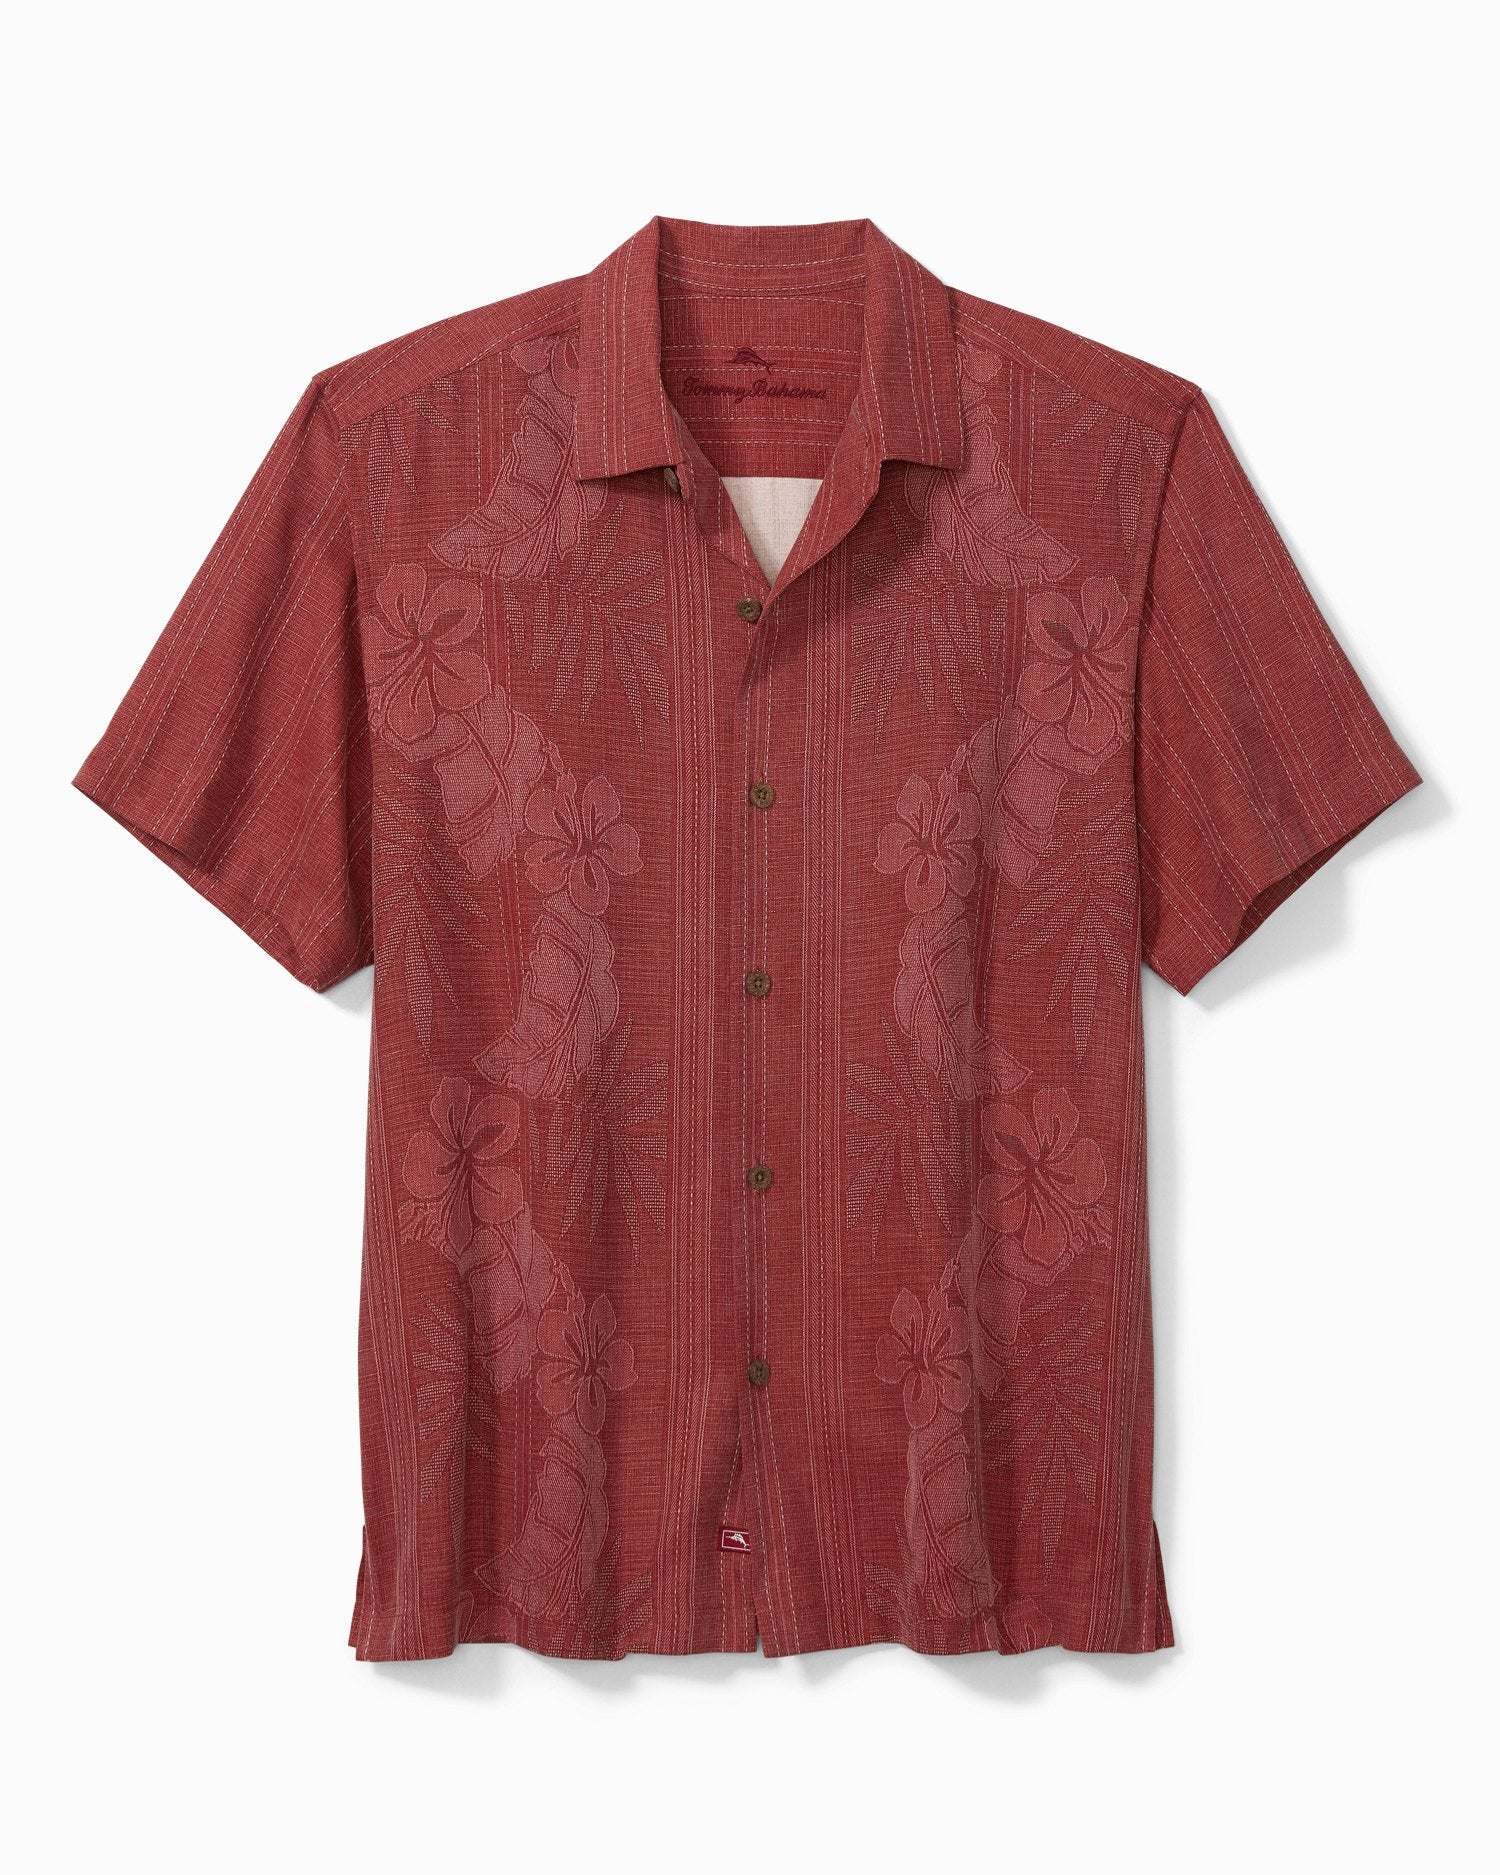 Tommy Bahama Men's White Boston Red Sox Go Big or Home Camp Button-Up Shirt